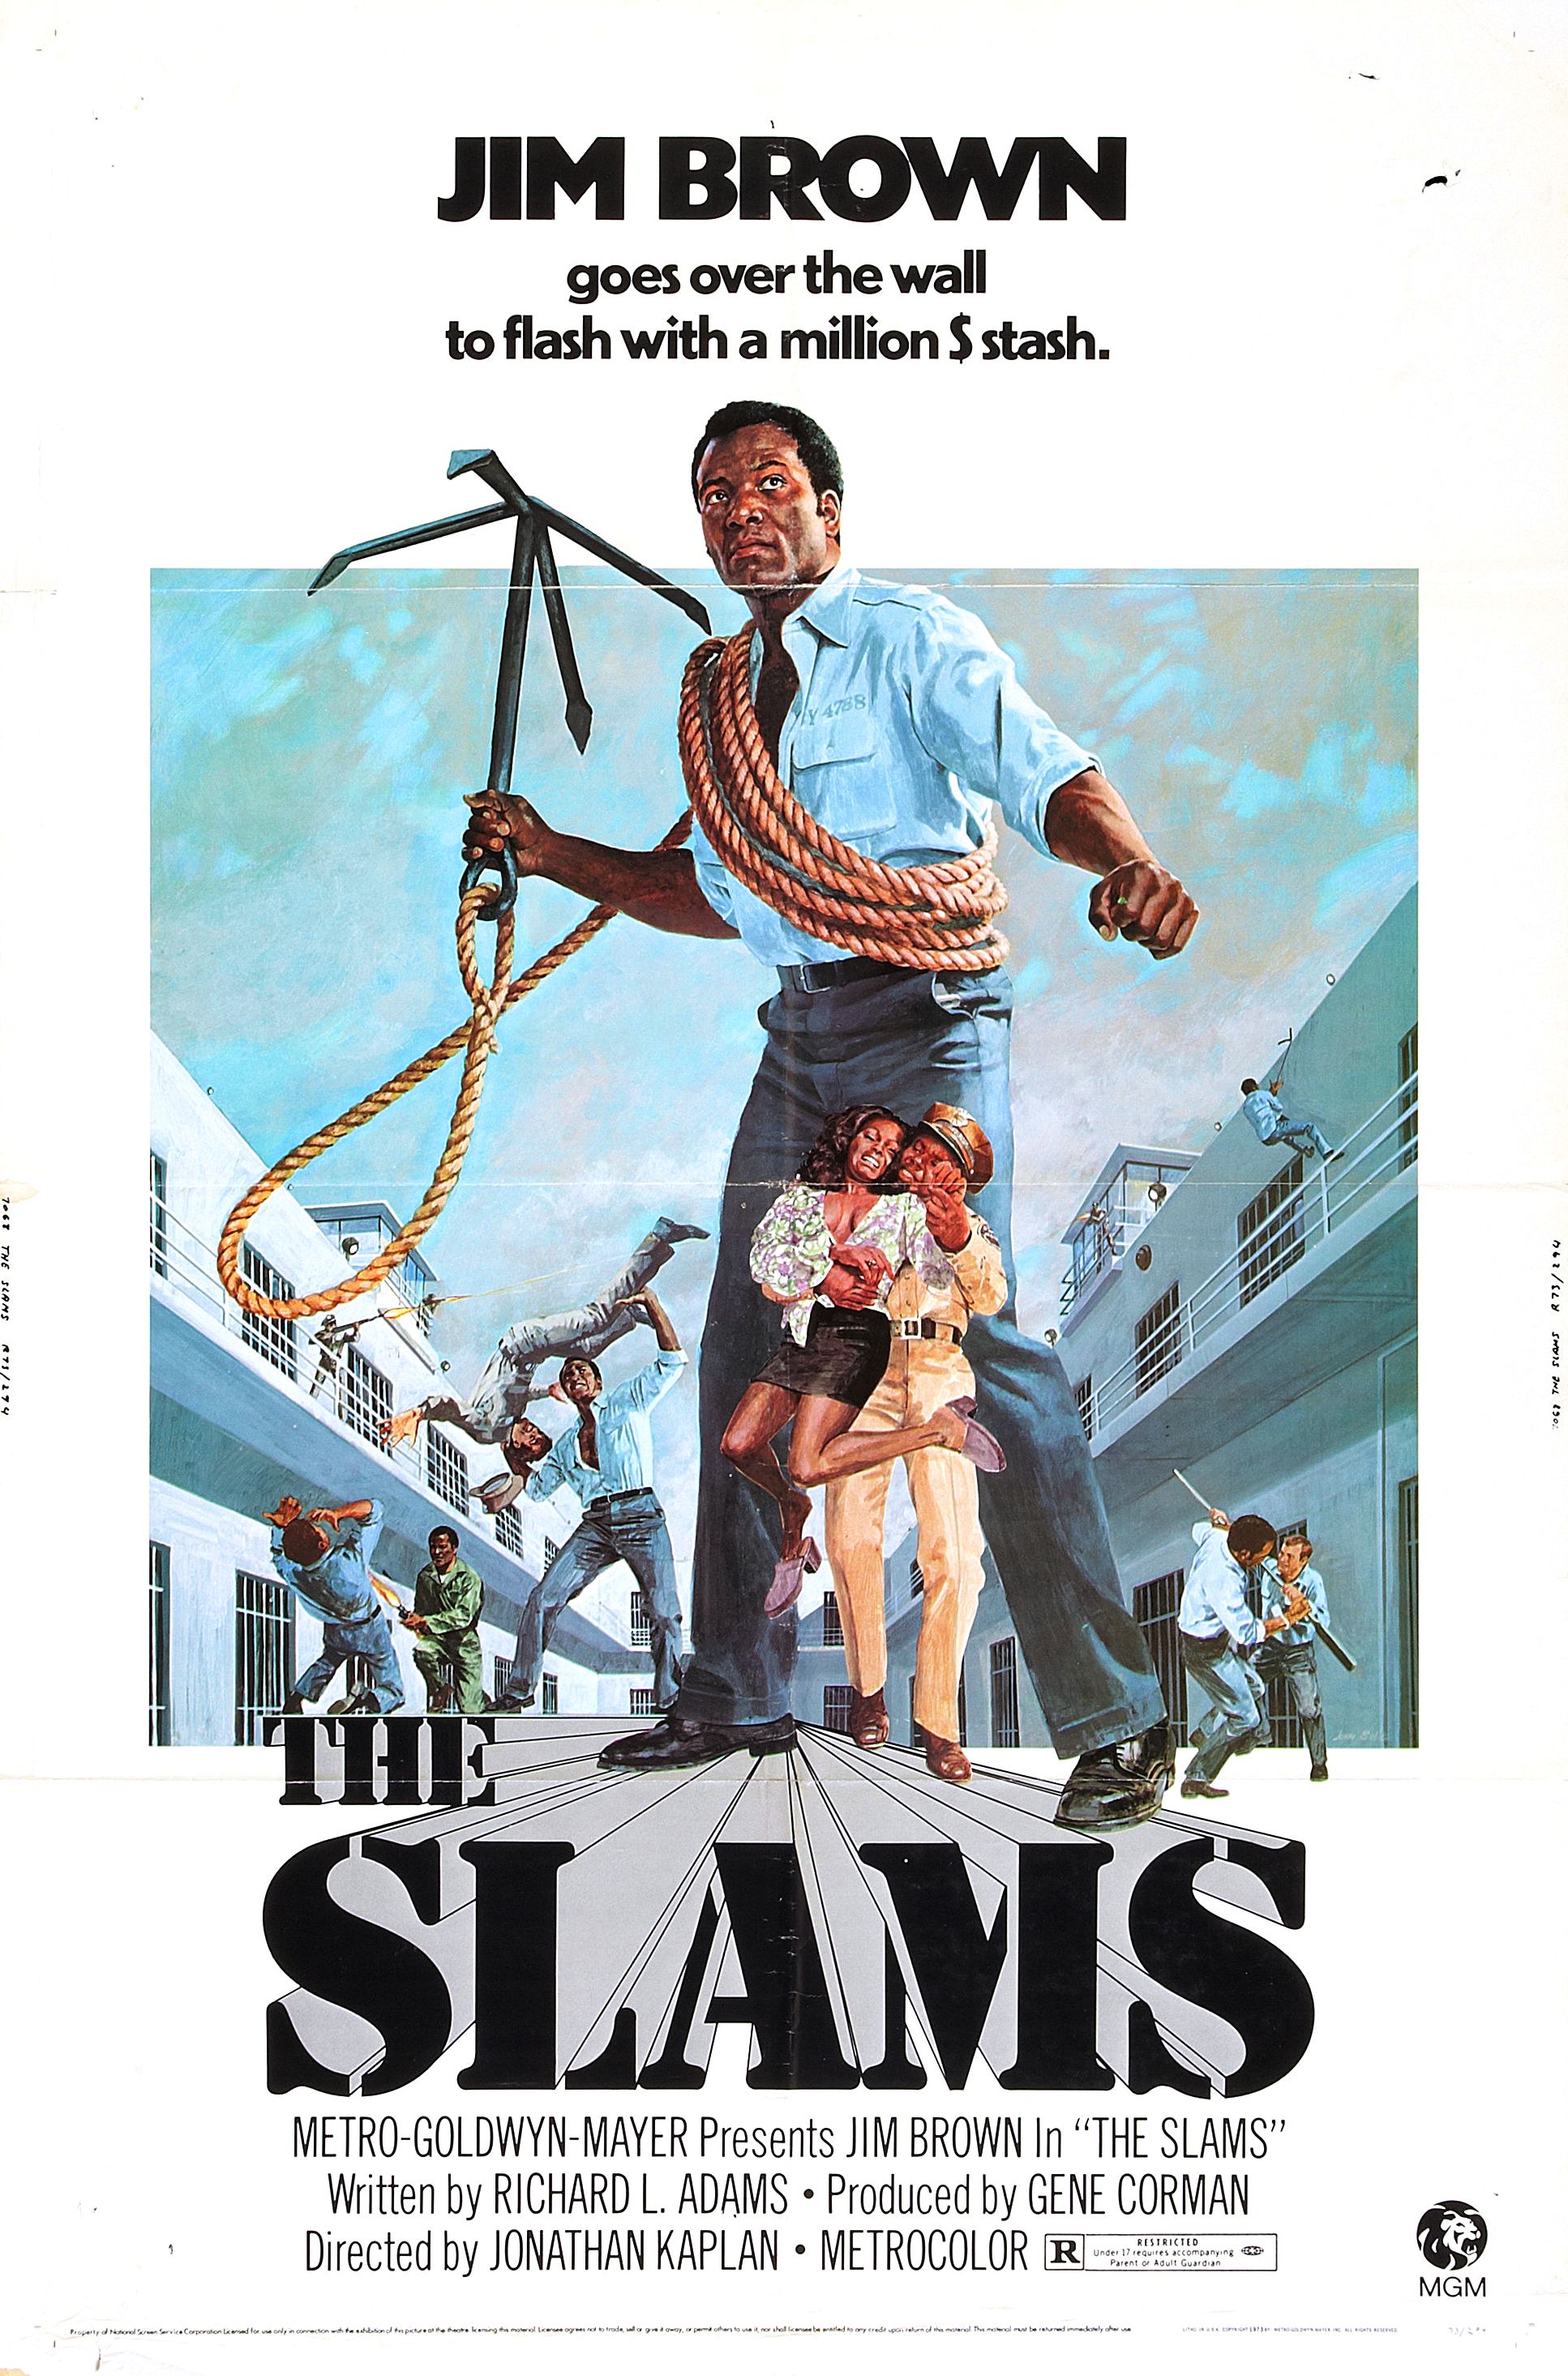 slams 1973 - Jim Brown goes over the wall to flash with a million stash. Slams Metro Goldwyn Mayer Presents Jim Brown In The Slams" Whitten by Richard L. Adams Produced by Gene Corman Directed by Jonathan Kaplan Metrocolor Red